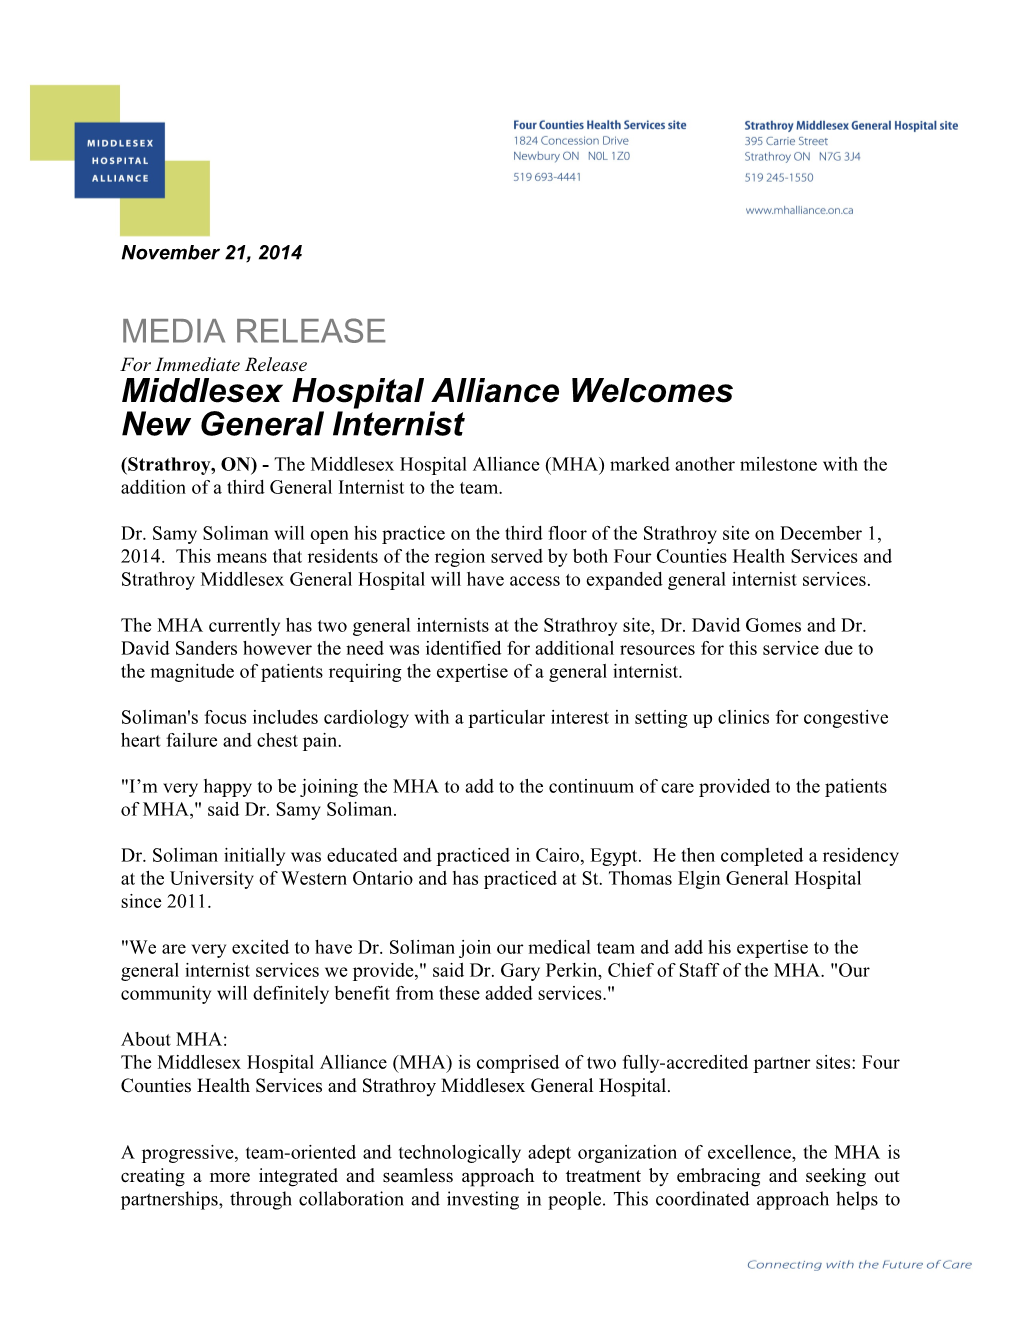 Middlesex Hospital Alliance Welcomes New General Internist